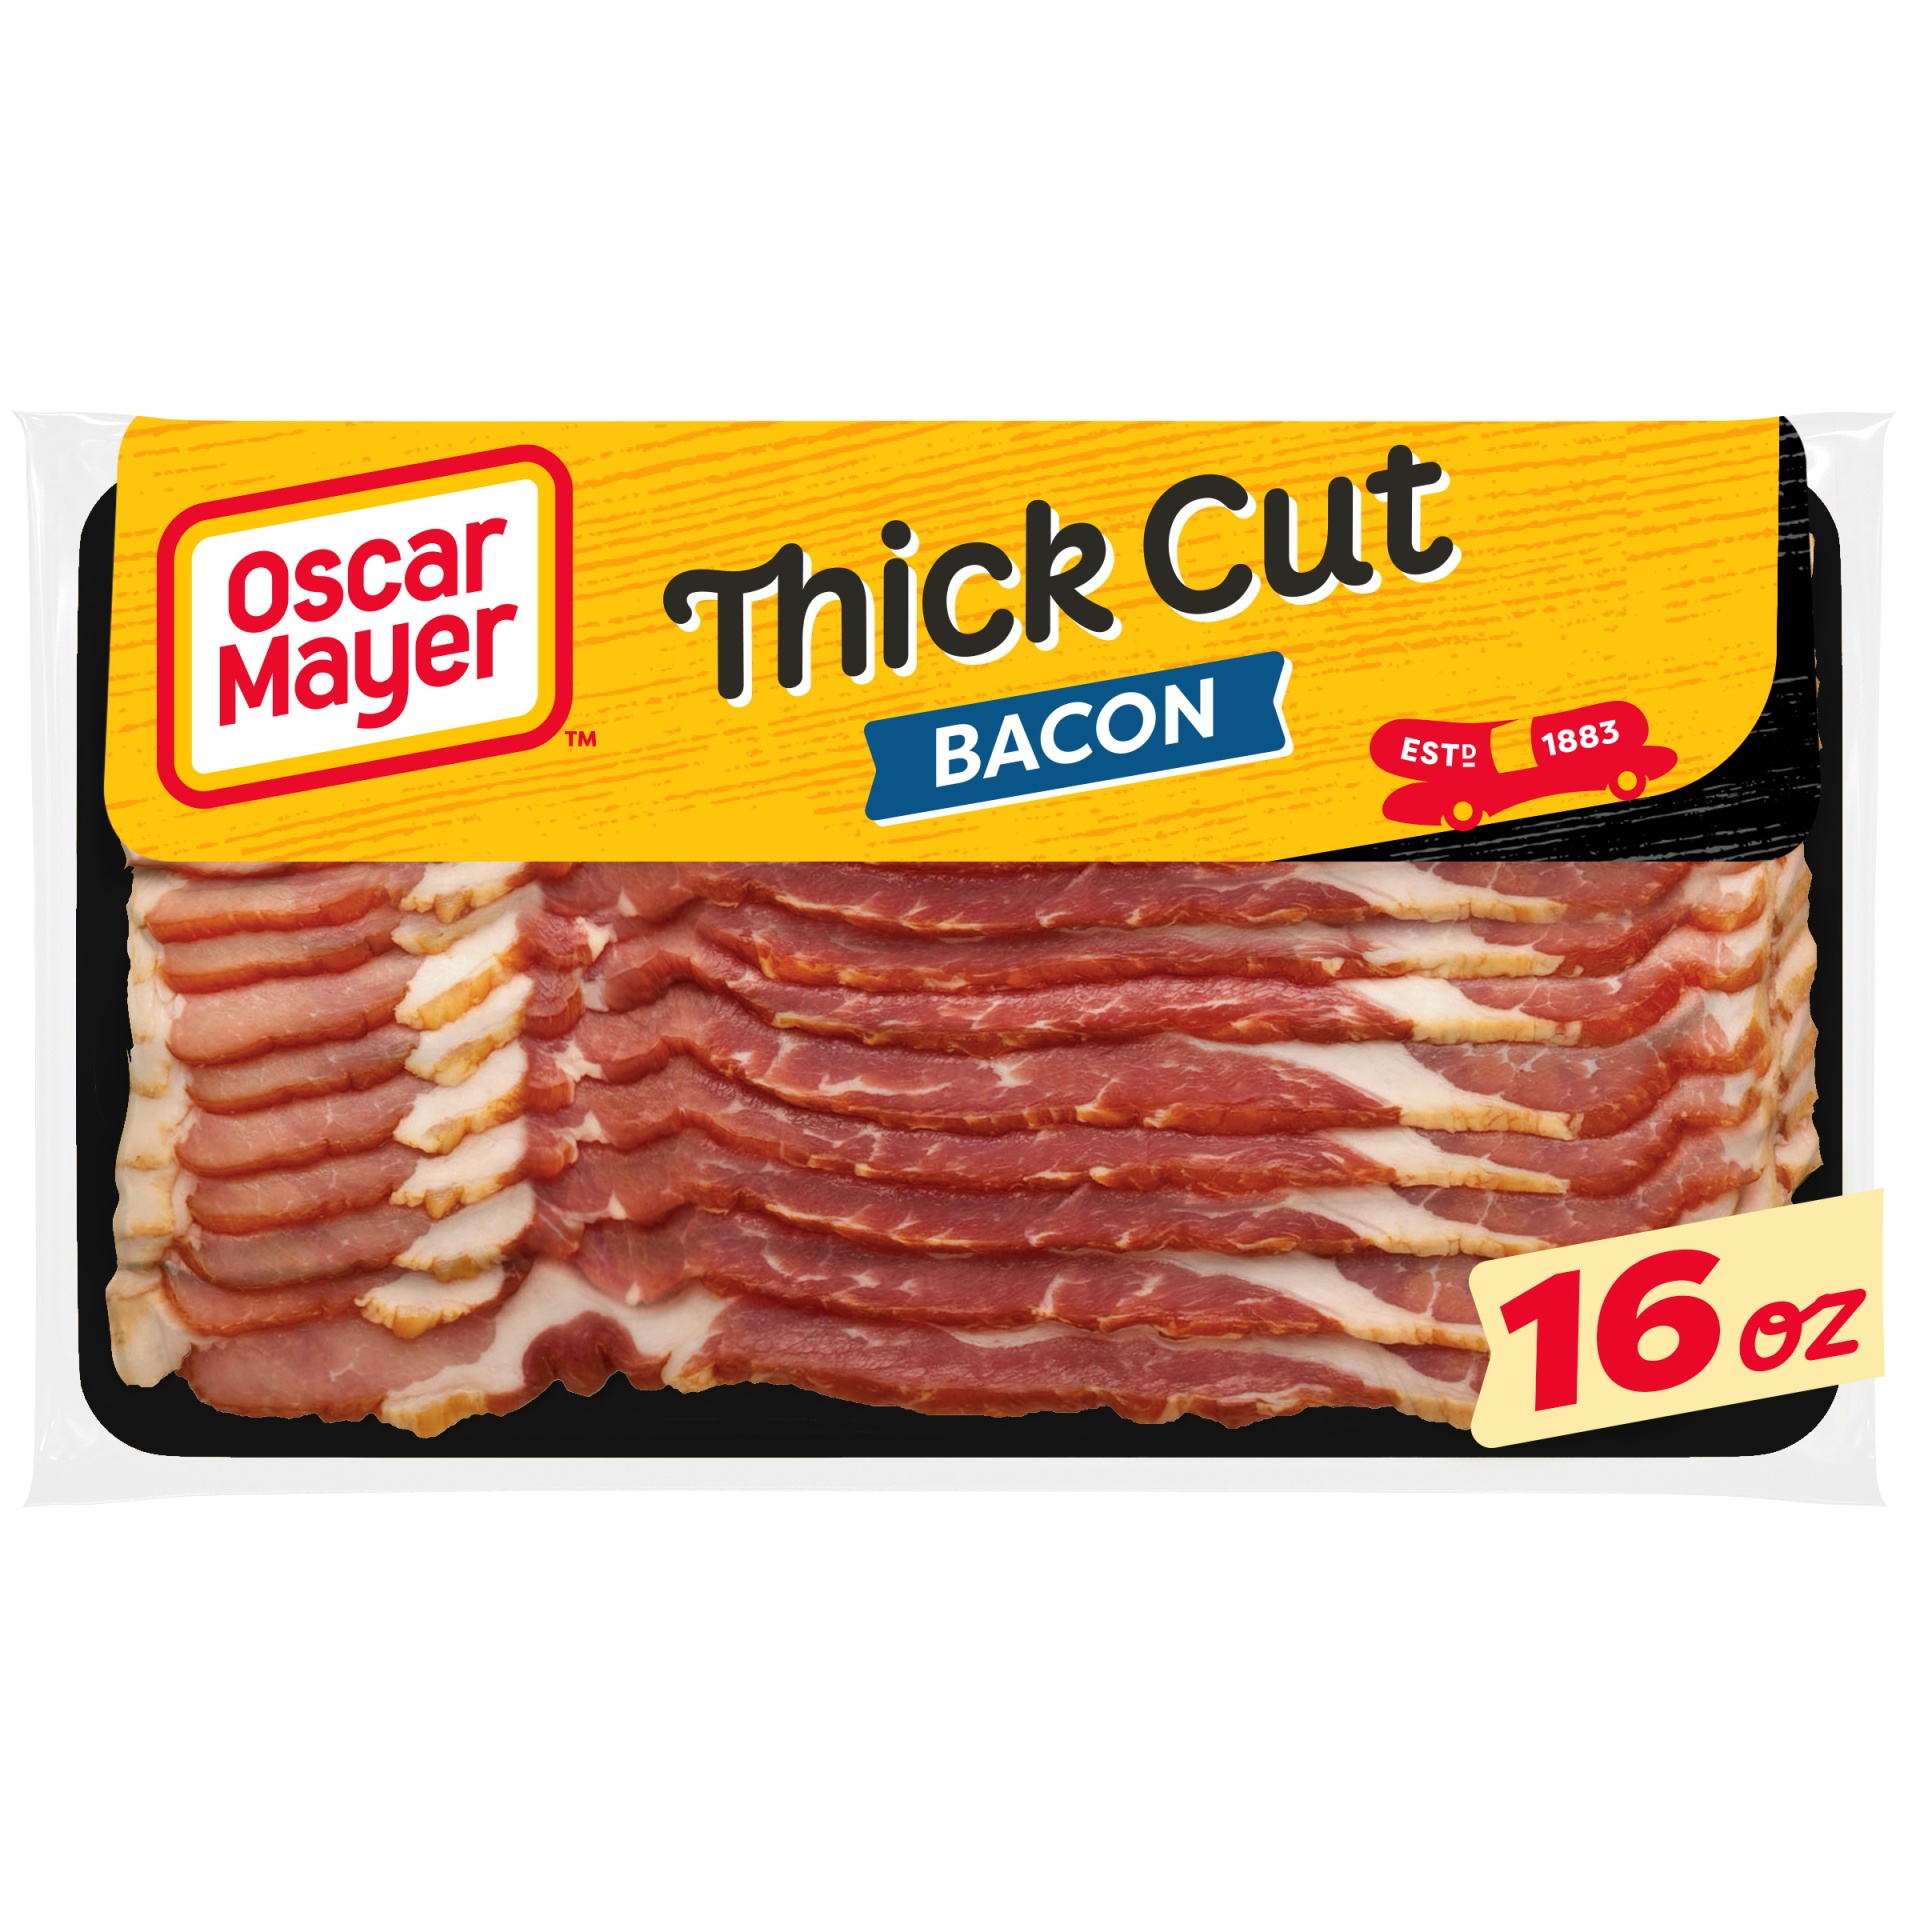 slide 1 of 12, Oscar Mayer Naturally Hardwood Smoked Thick Cut Bacon Pack, 11-13 slices, 16 oz